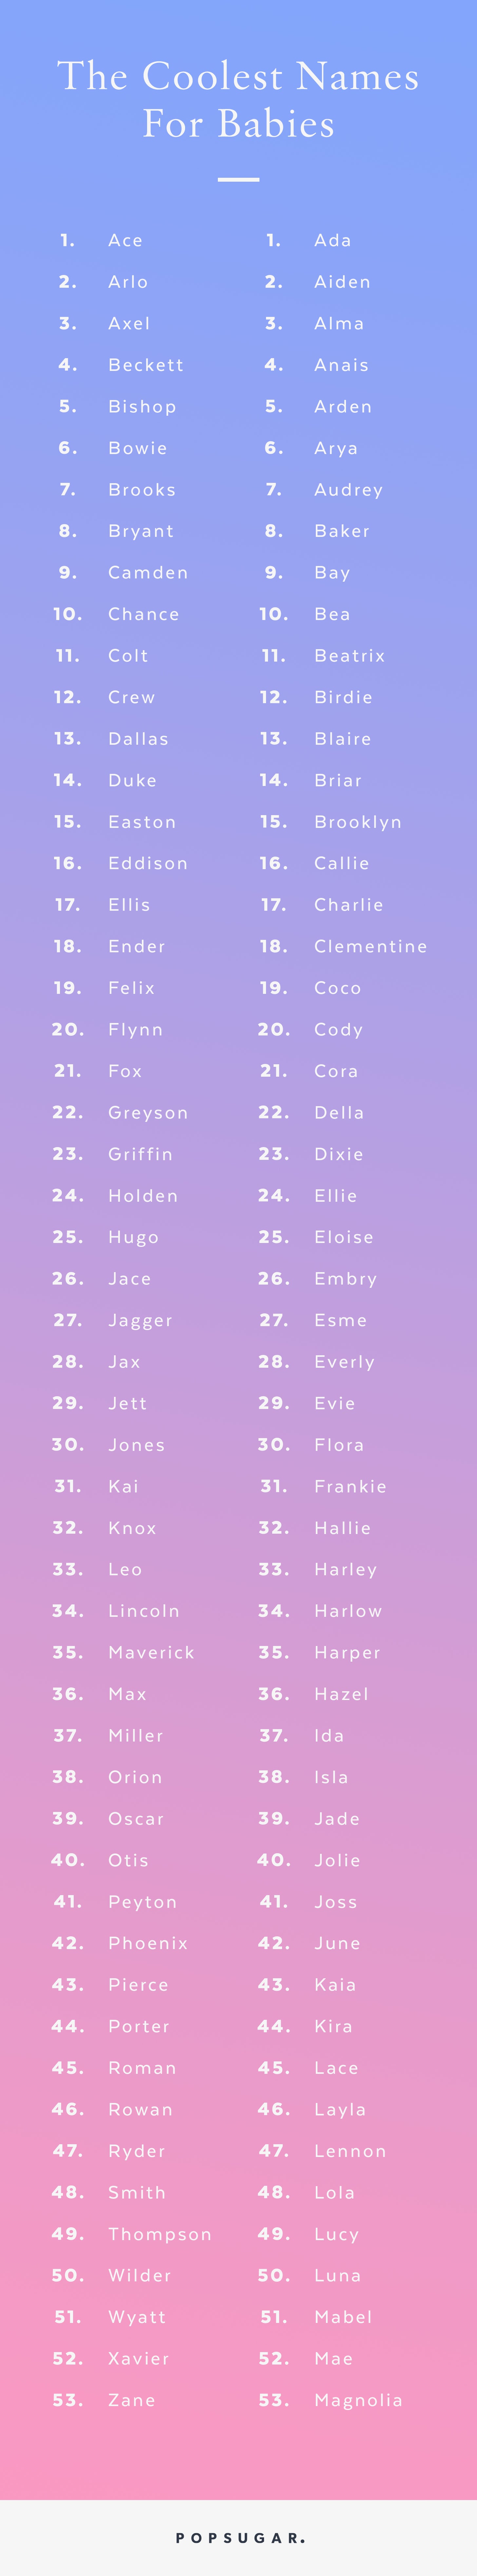 Baby Names For Girls 2020